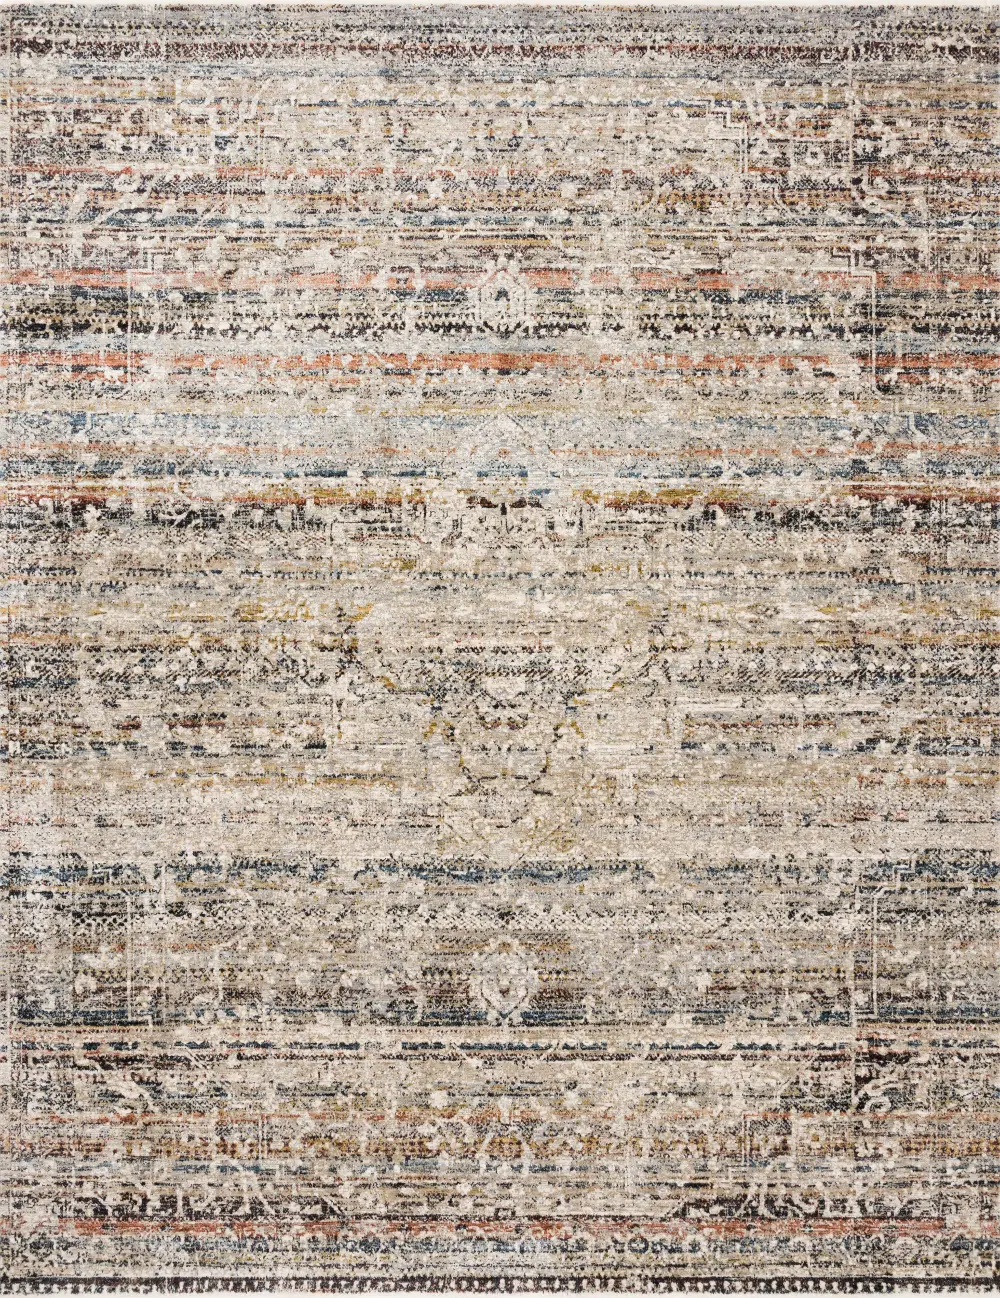 THE-03/TAUPE/MULTI/5X8 Theia 5 x 8 Taupe and Multi-Colored Area Rug-1